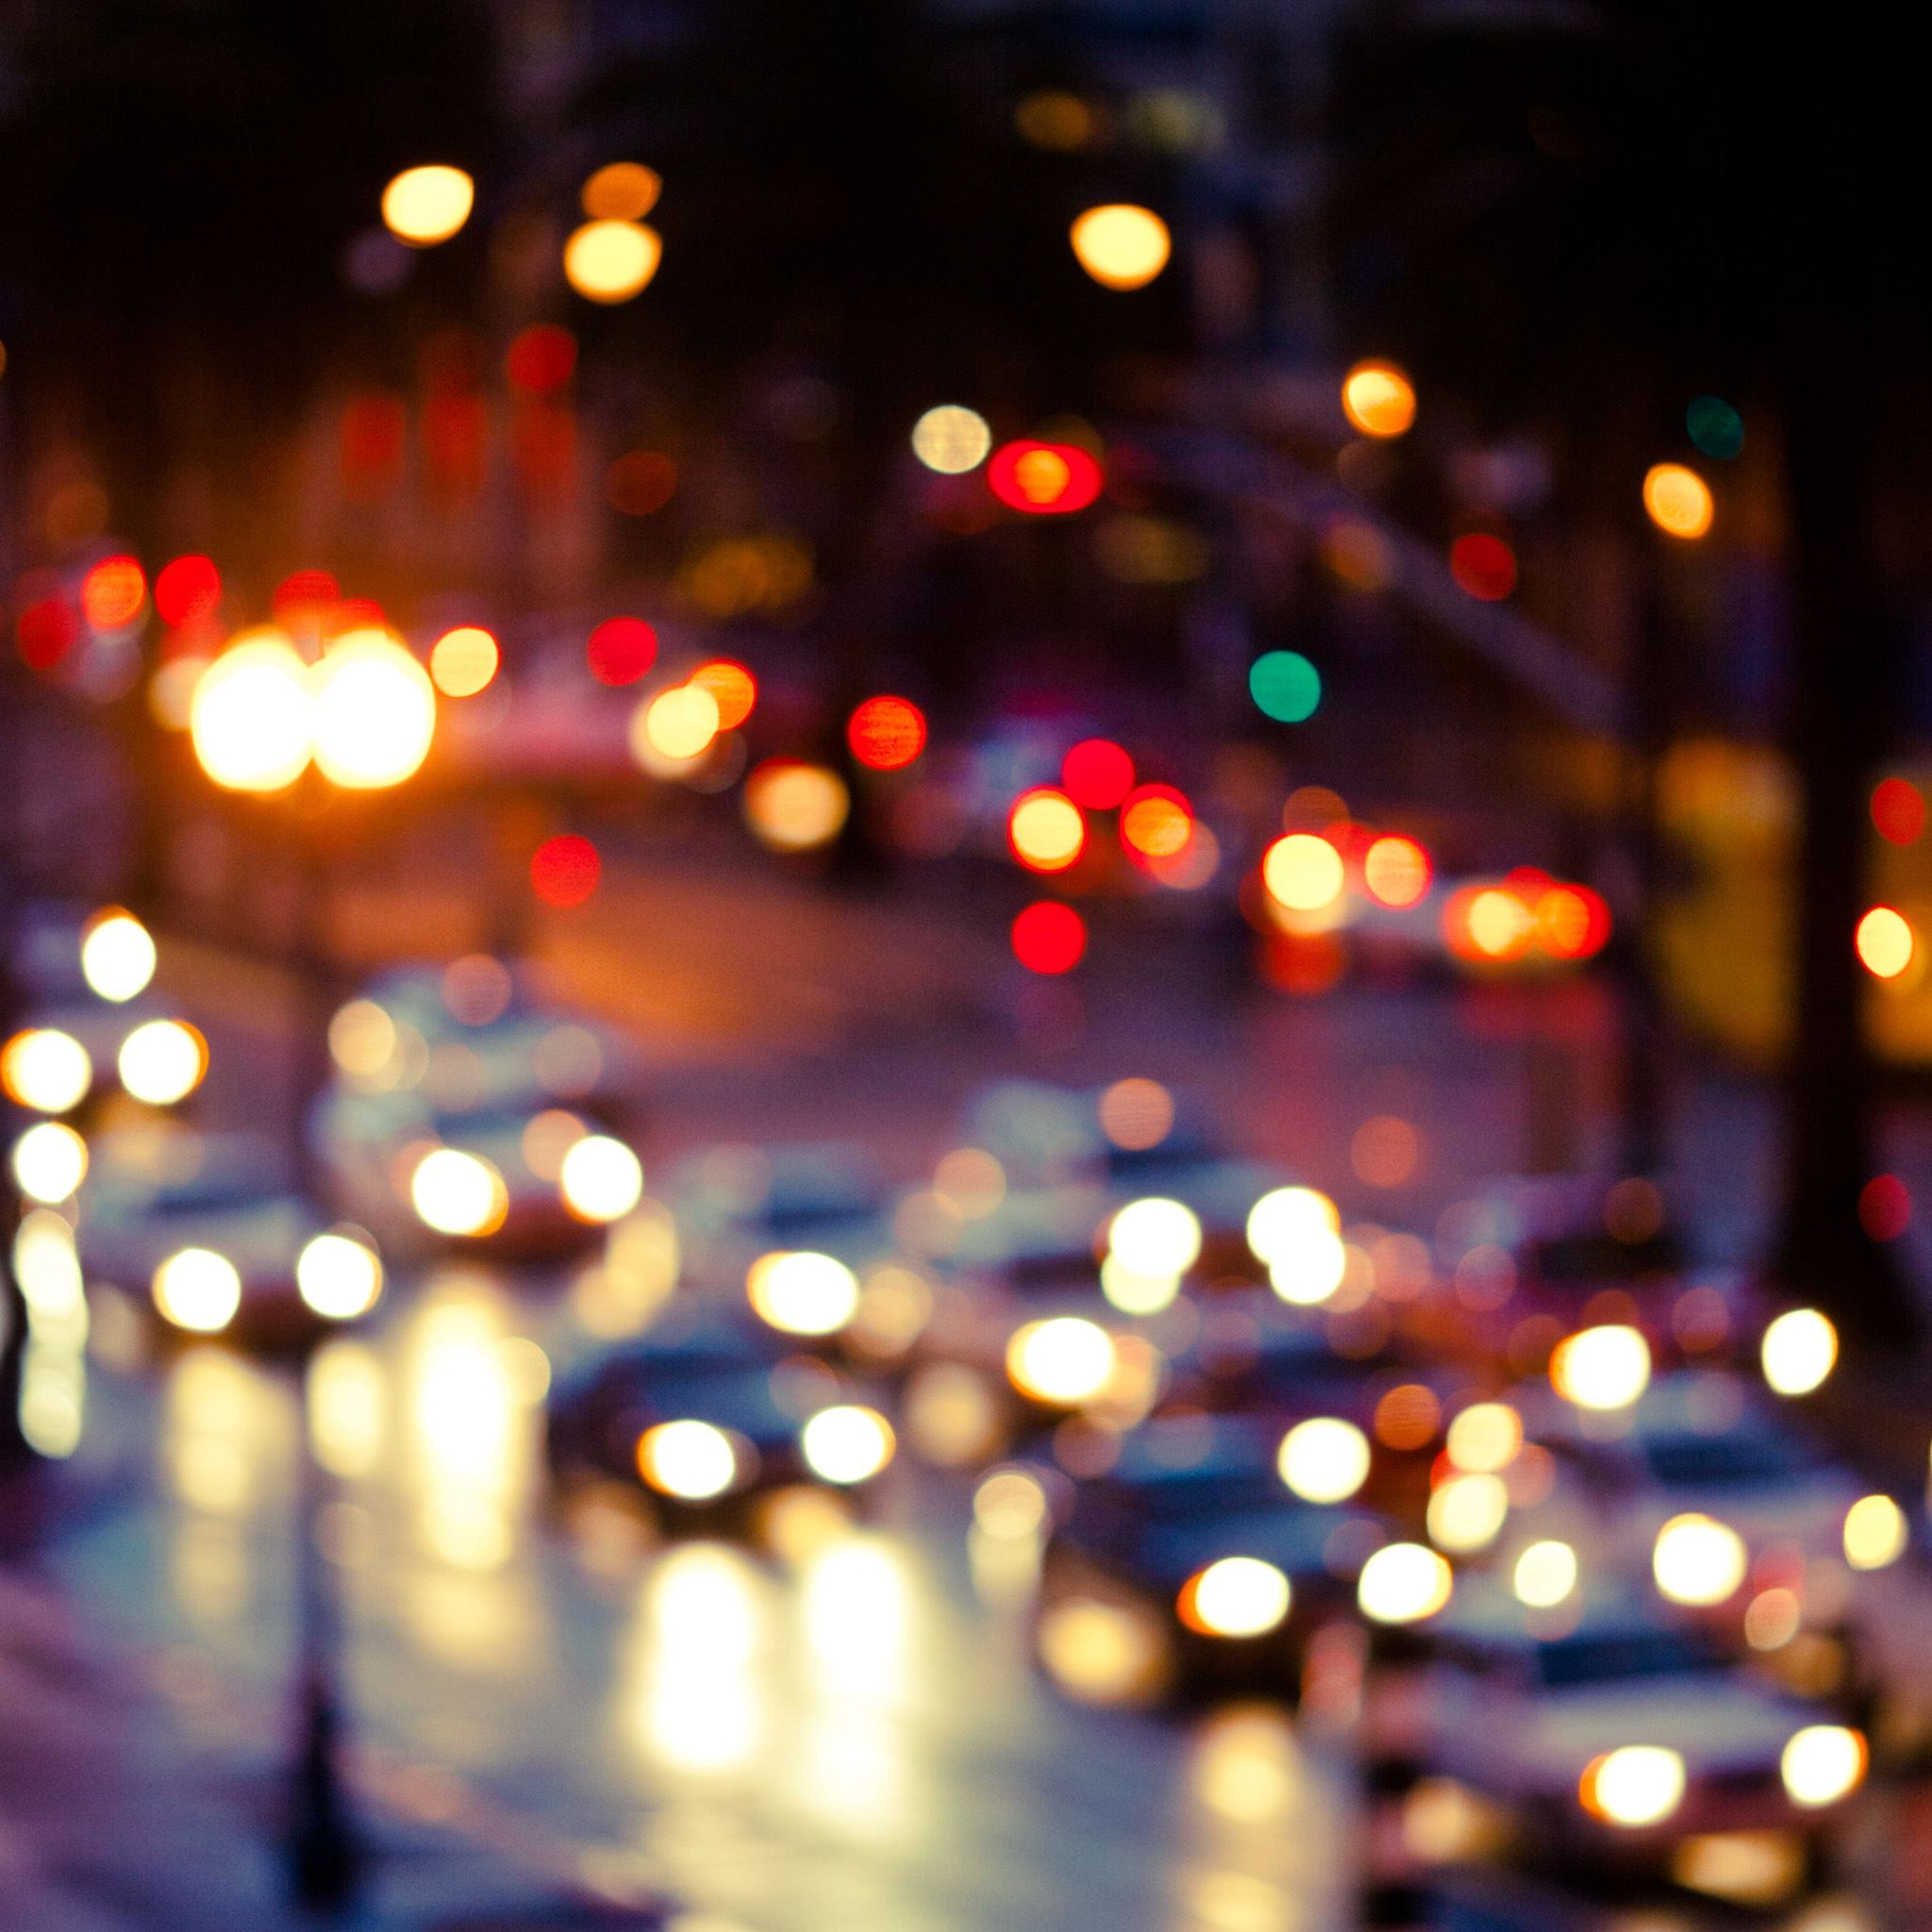 A blurry photo of a busy street at night with cars and street lights - Blurry